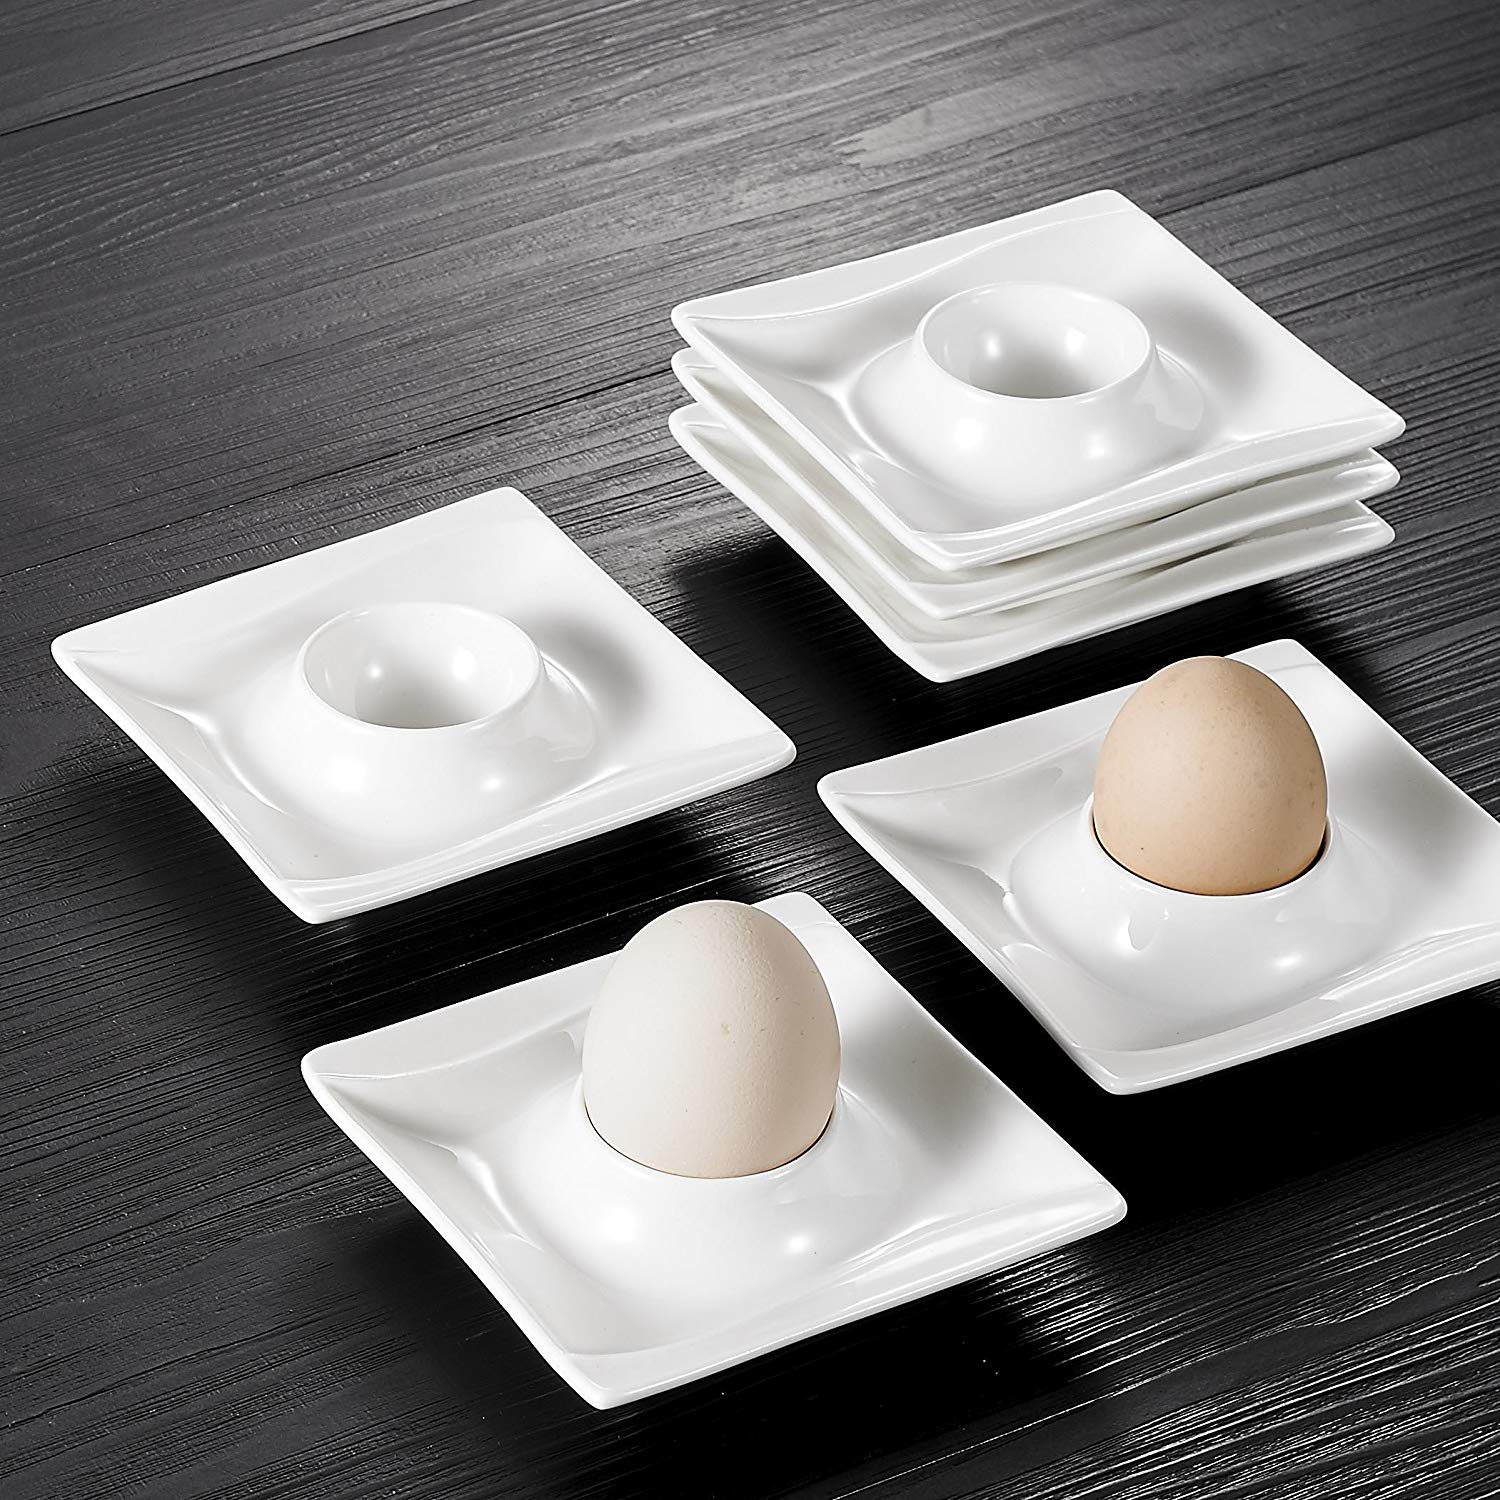 Carina 6-Piece 4"  Ivory White Porcelain Egg Cups Holder - Nordic Side - 10510525, Carina, Ceramic, China, cm, Cream, Cups, Egg, Holder, Ivory, MALACASA, Piece, Plates, Porcelain, Stand, Whit